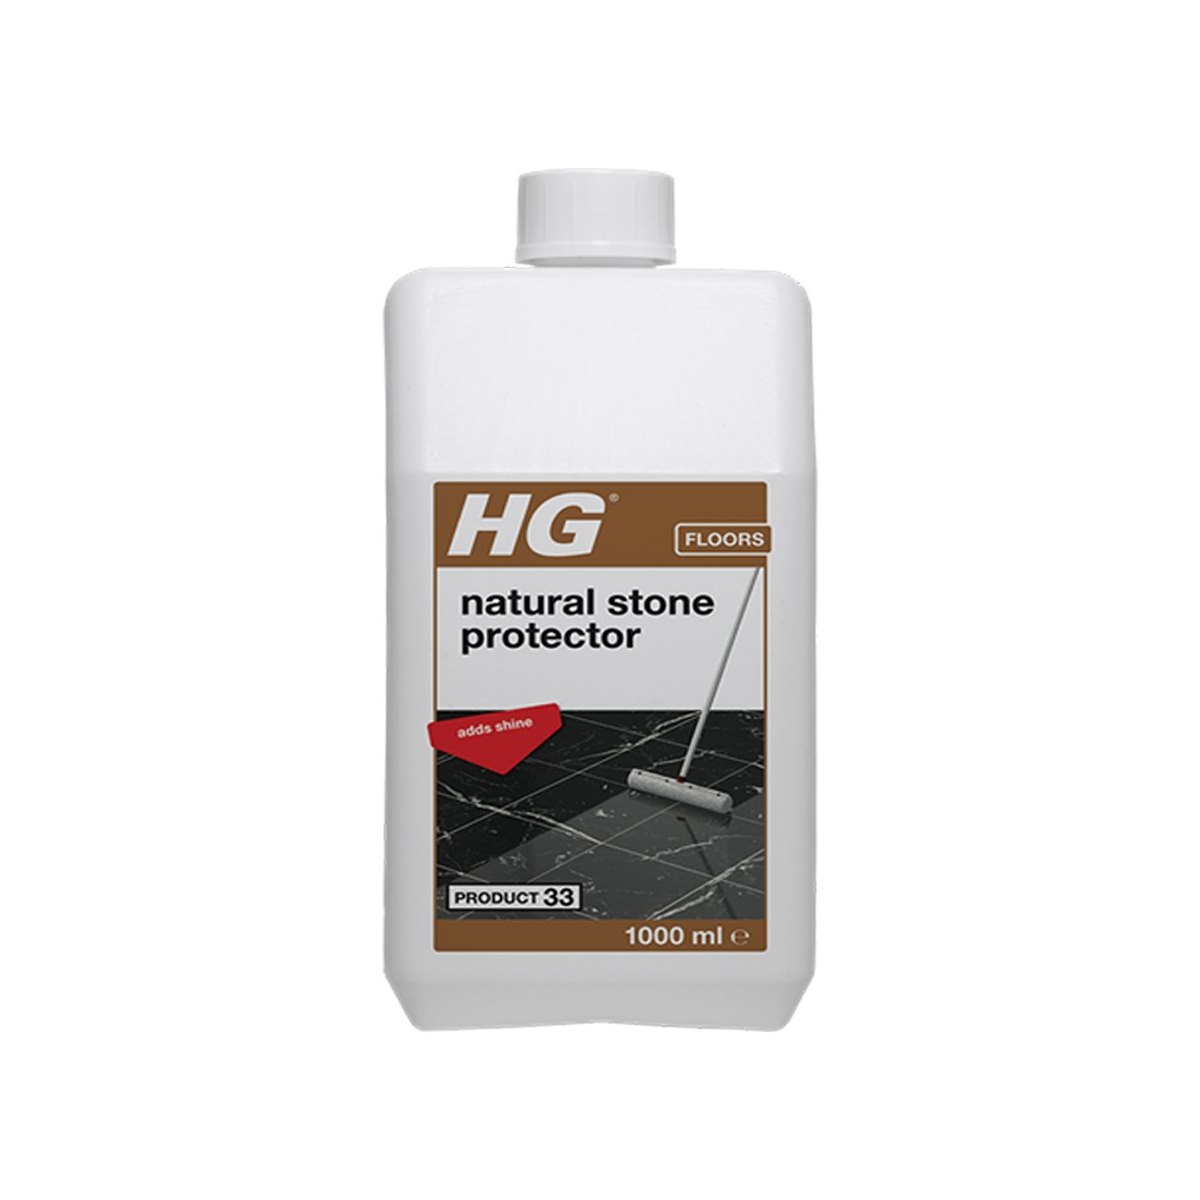 HG Natural Stone Protector Adds Shine Product 33 1Litre